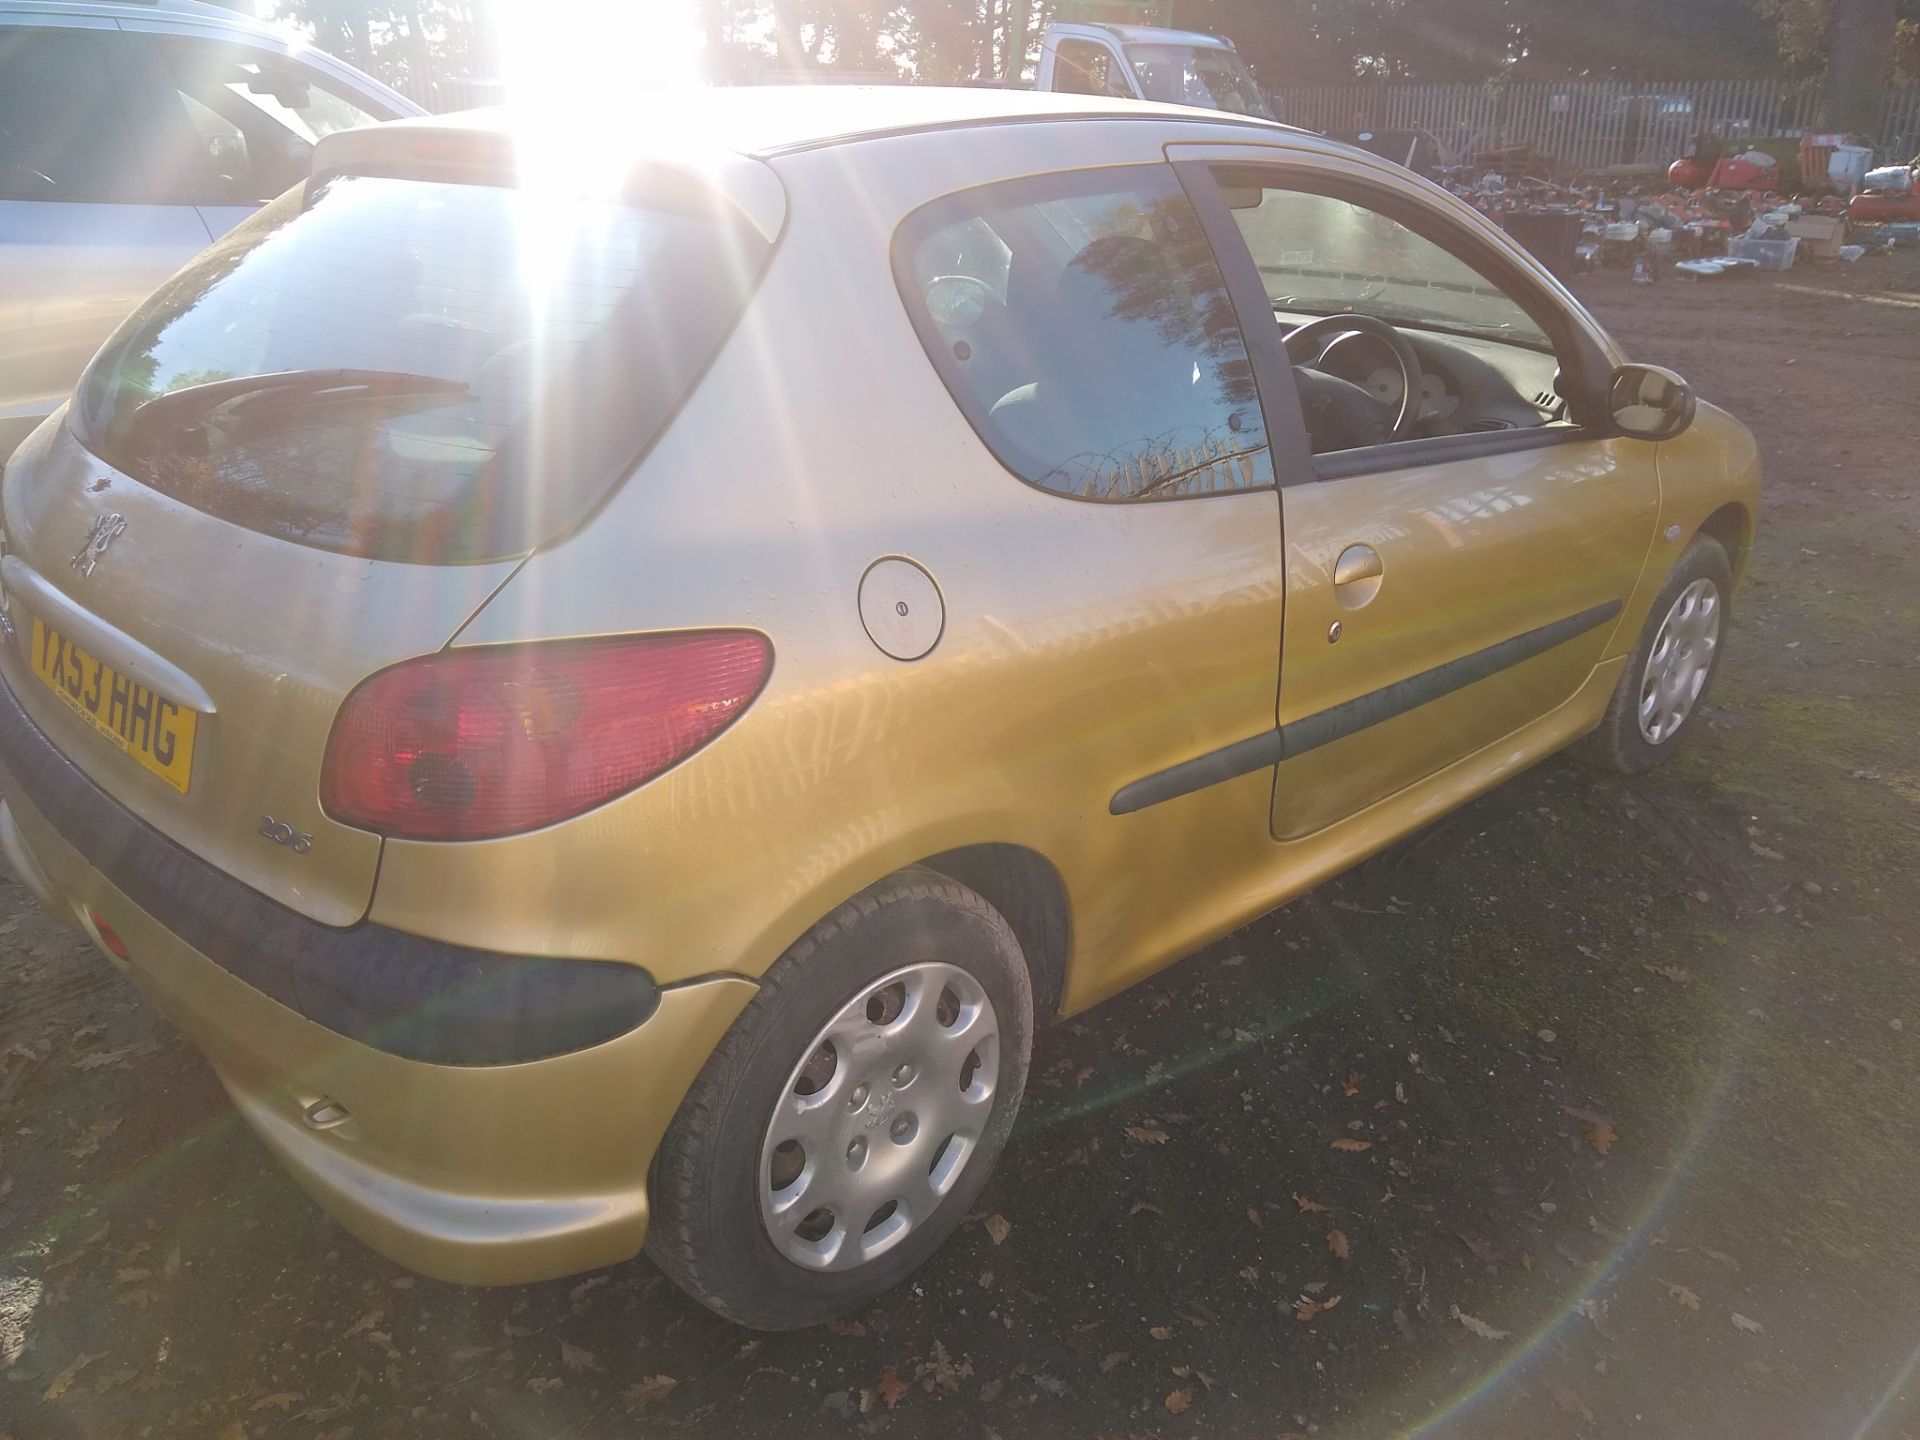 Peugeot 2065 3-door 1.4, YX53HHG, 00's 64522. Unused for more than 2 years. - Image 2 of 9